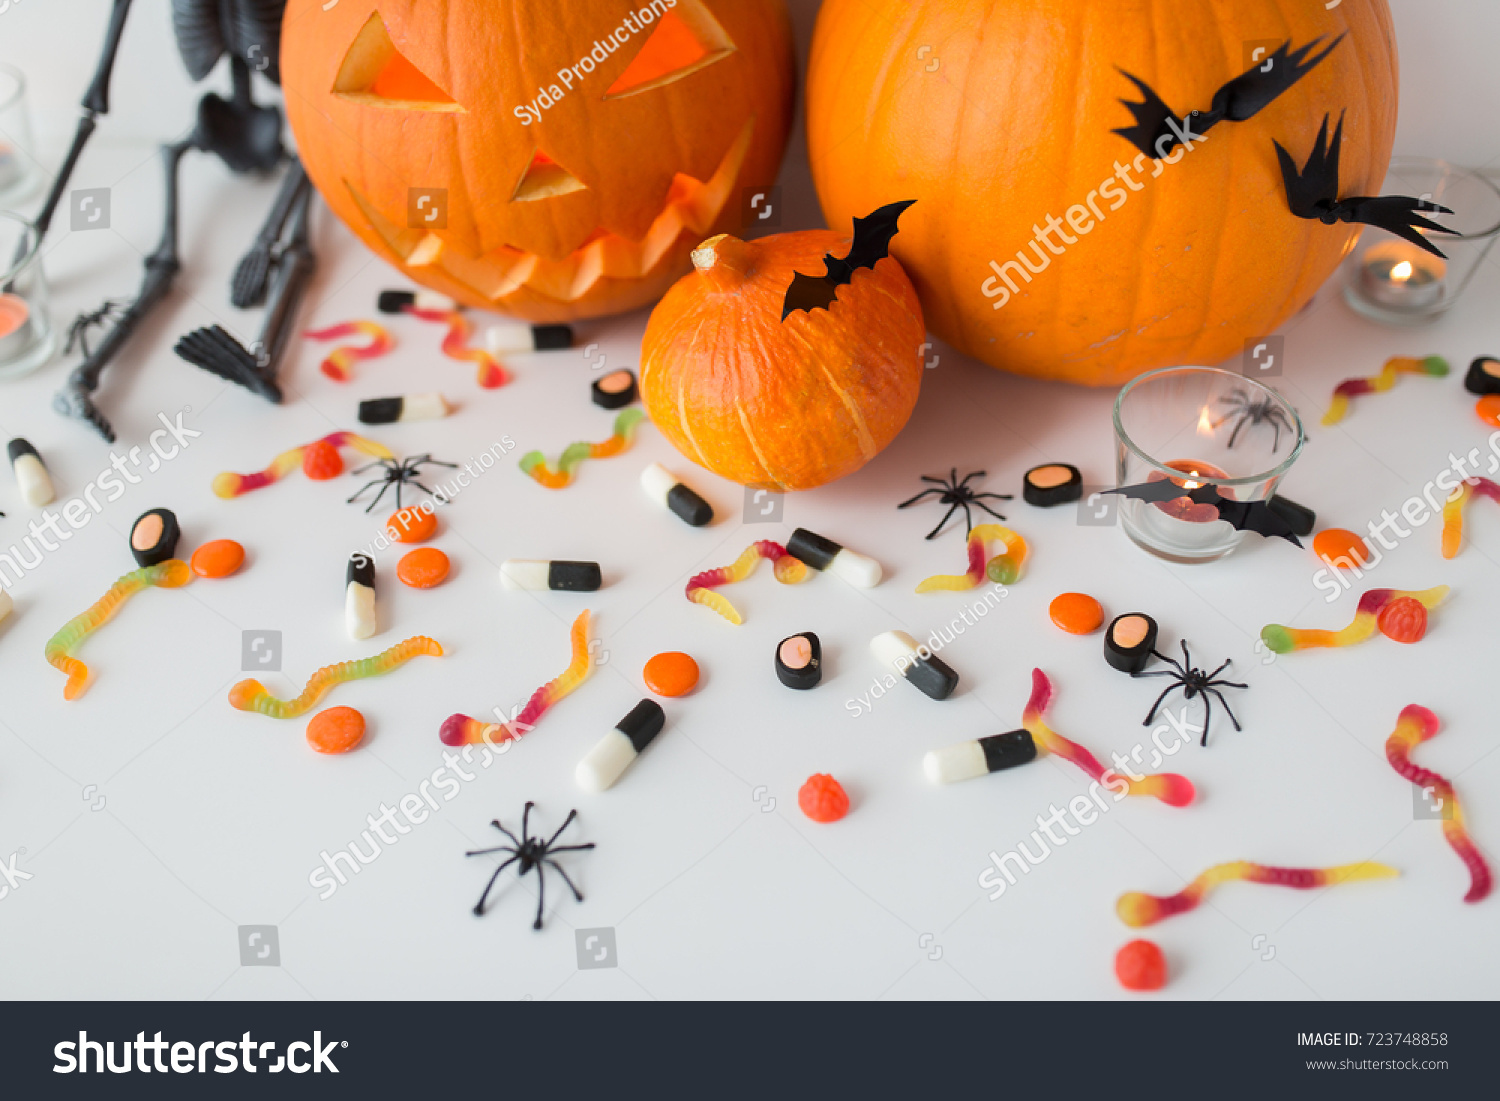 halloween, holidays and decoration concept - jack-o-lantern or carved pumpkins with candles on white background #723748858